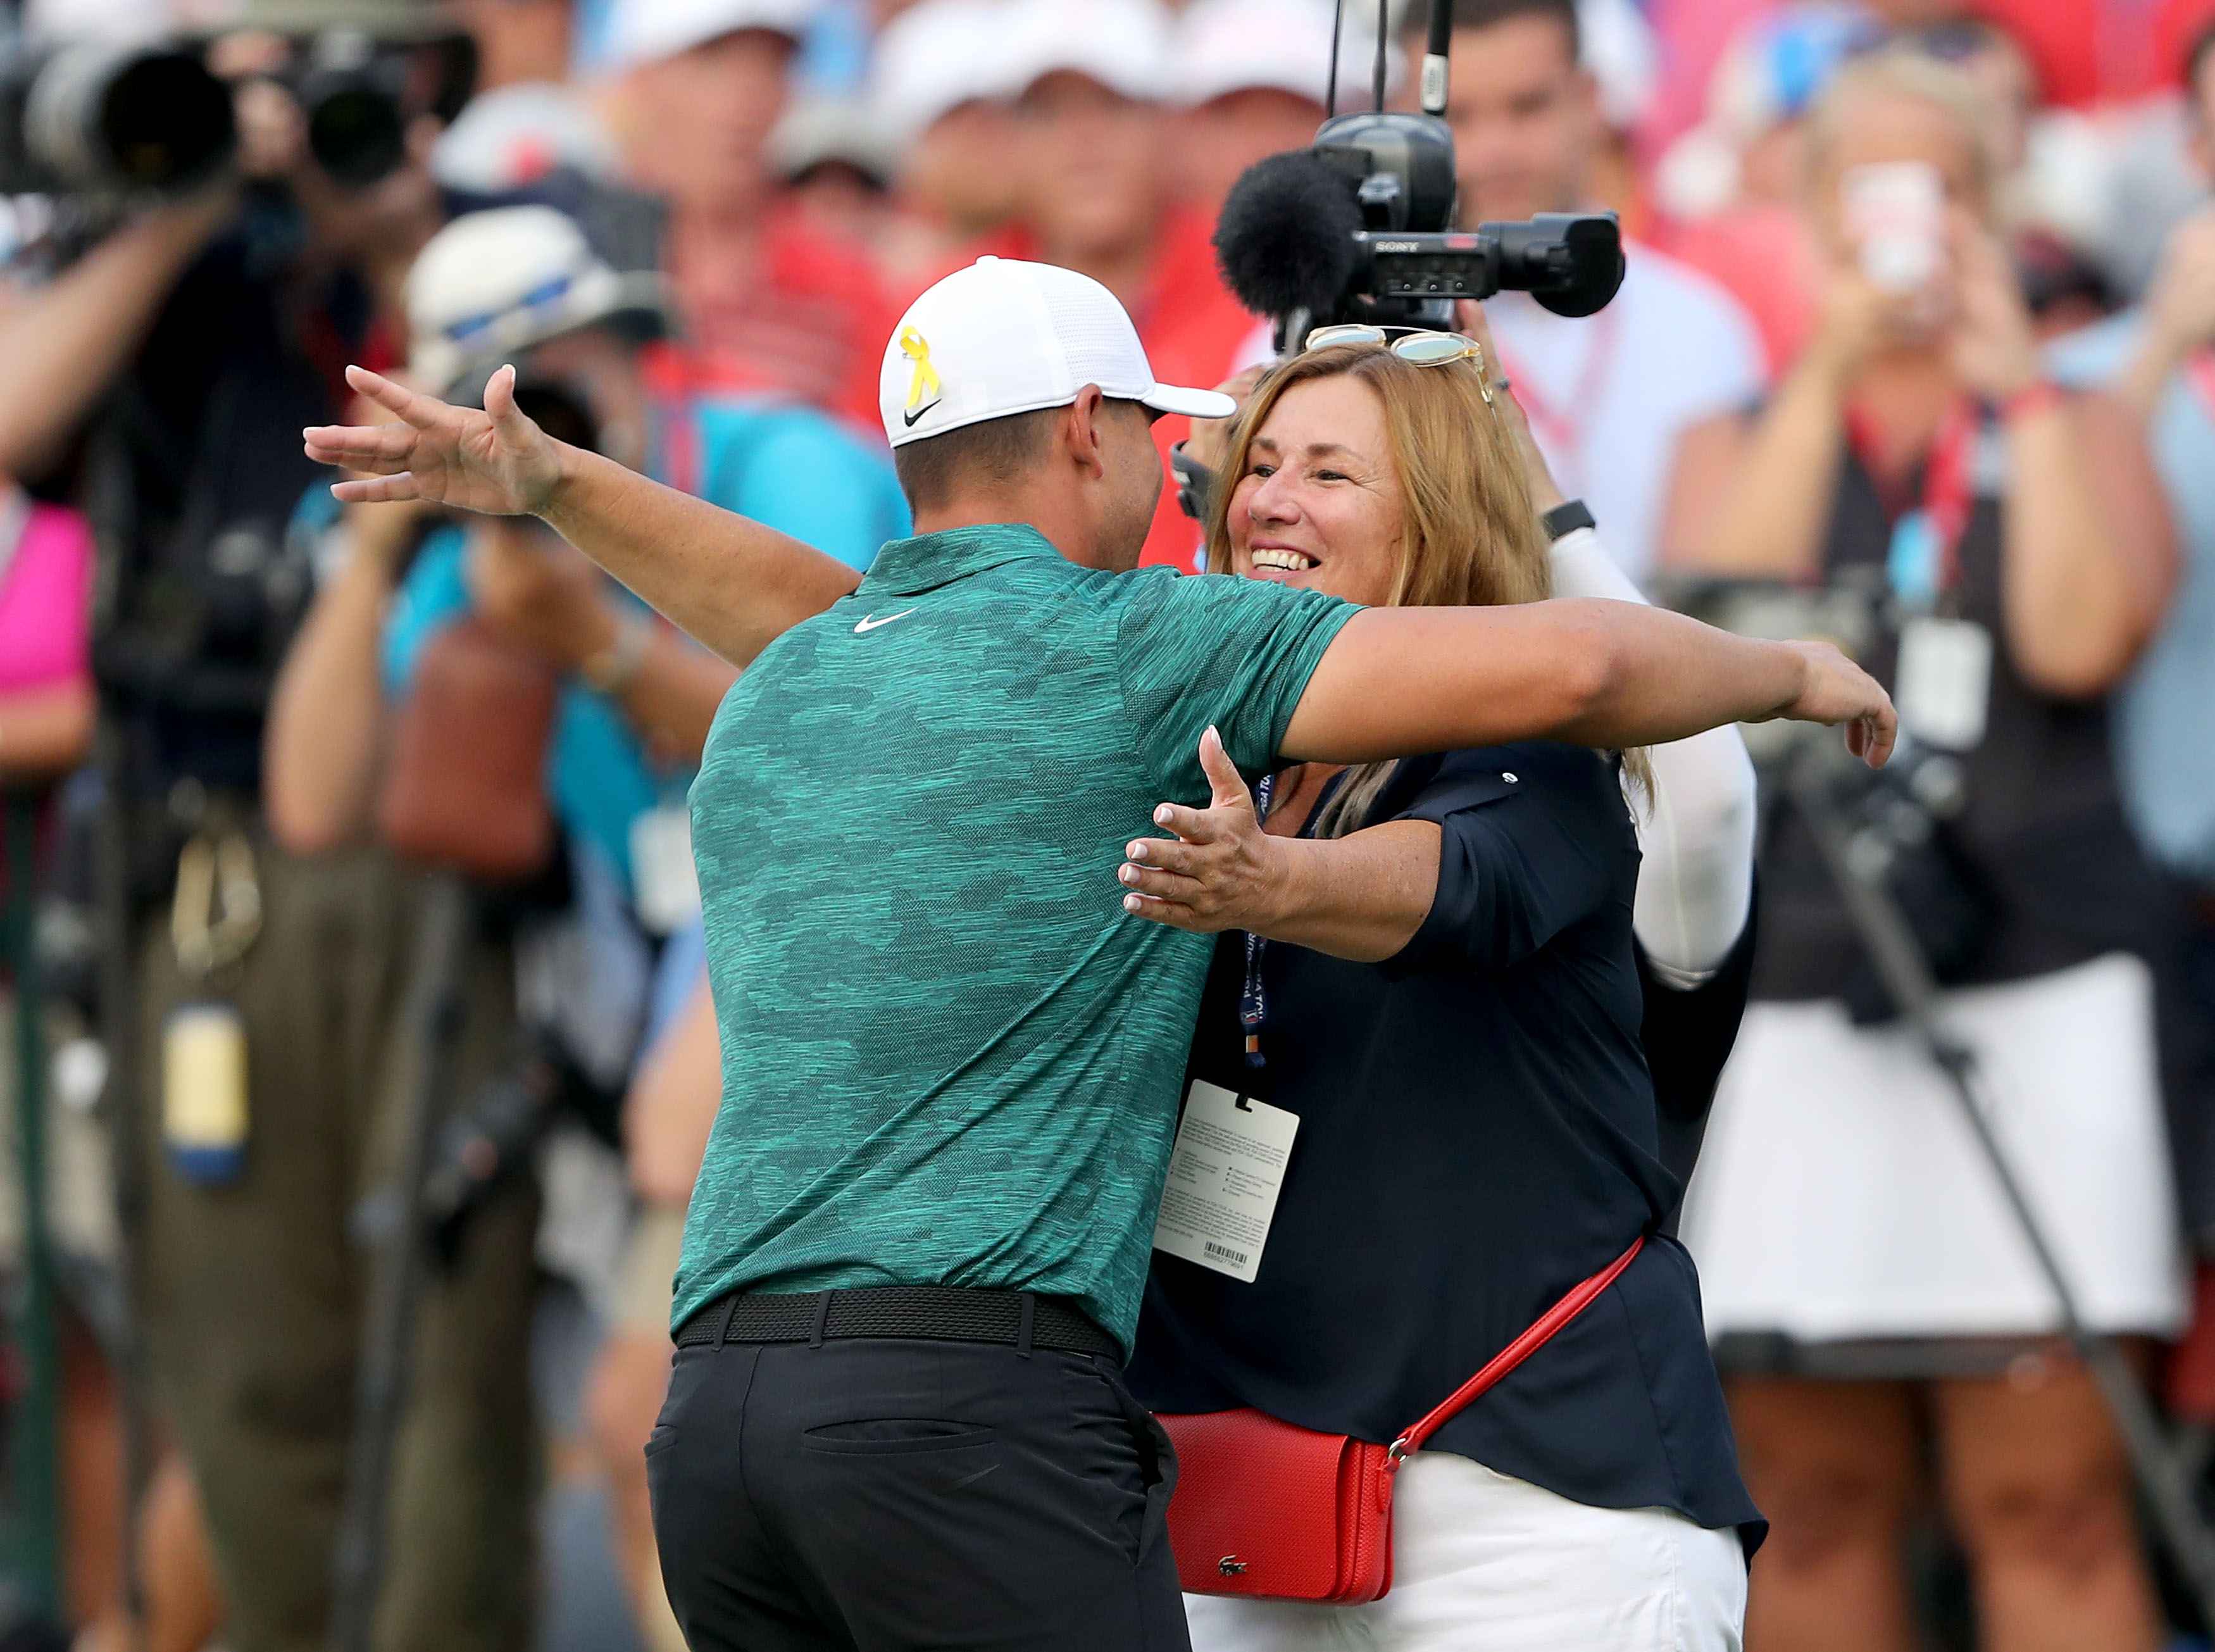 Brooks Koepka’s Mom Changed His Outlook When She Beat Breast Cancer: ‘Golf Was a Lot Less Important’